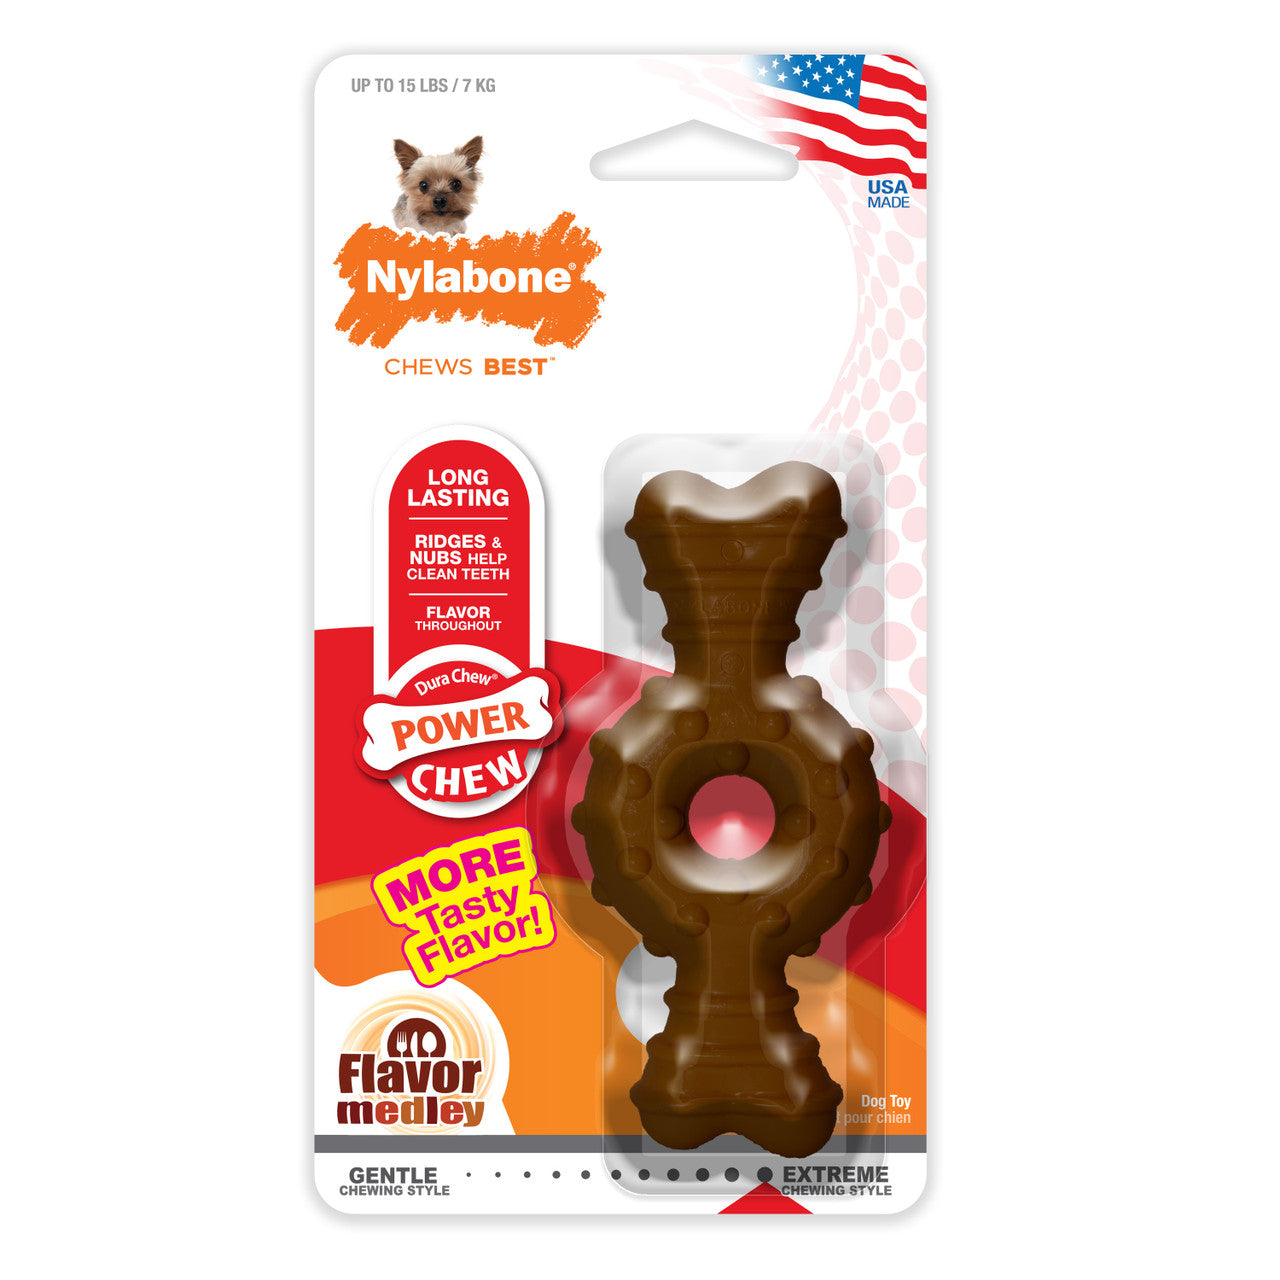 Nylabone Power Chew Ring Bone Chew Toy for Dogs Flavor Medley X-Small/Petite (1 Count)